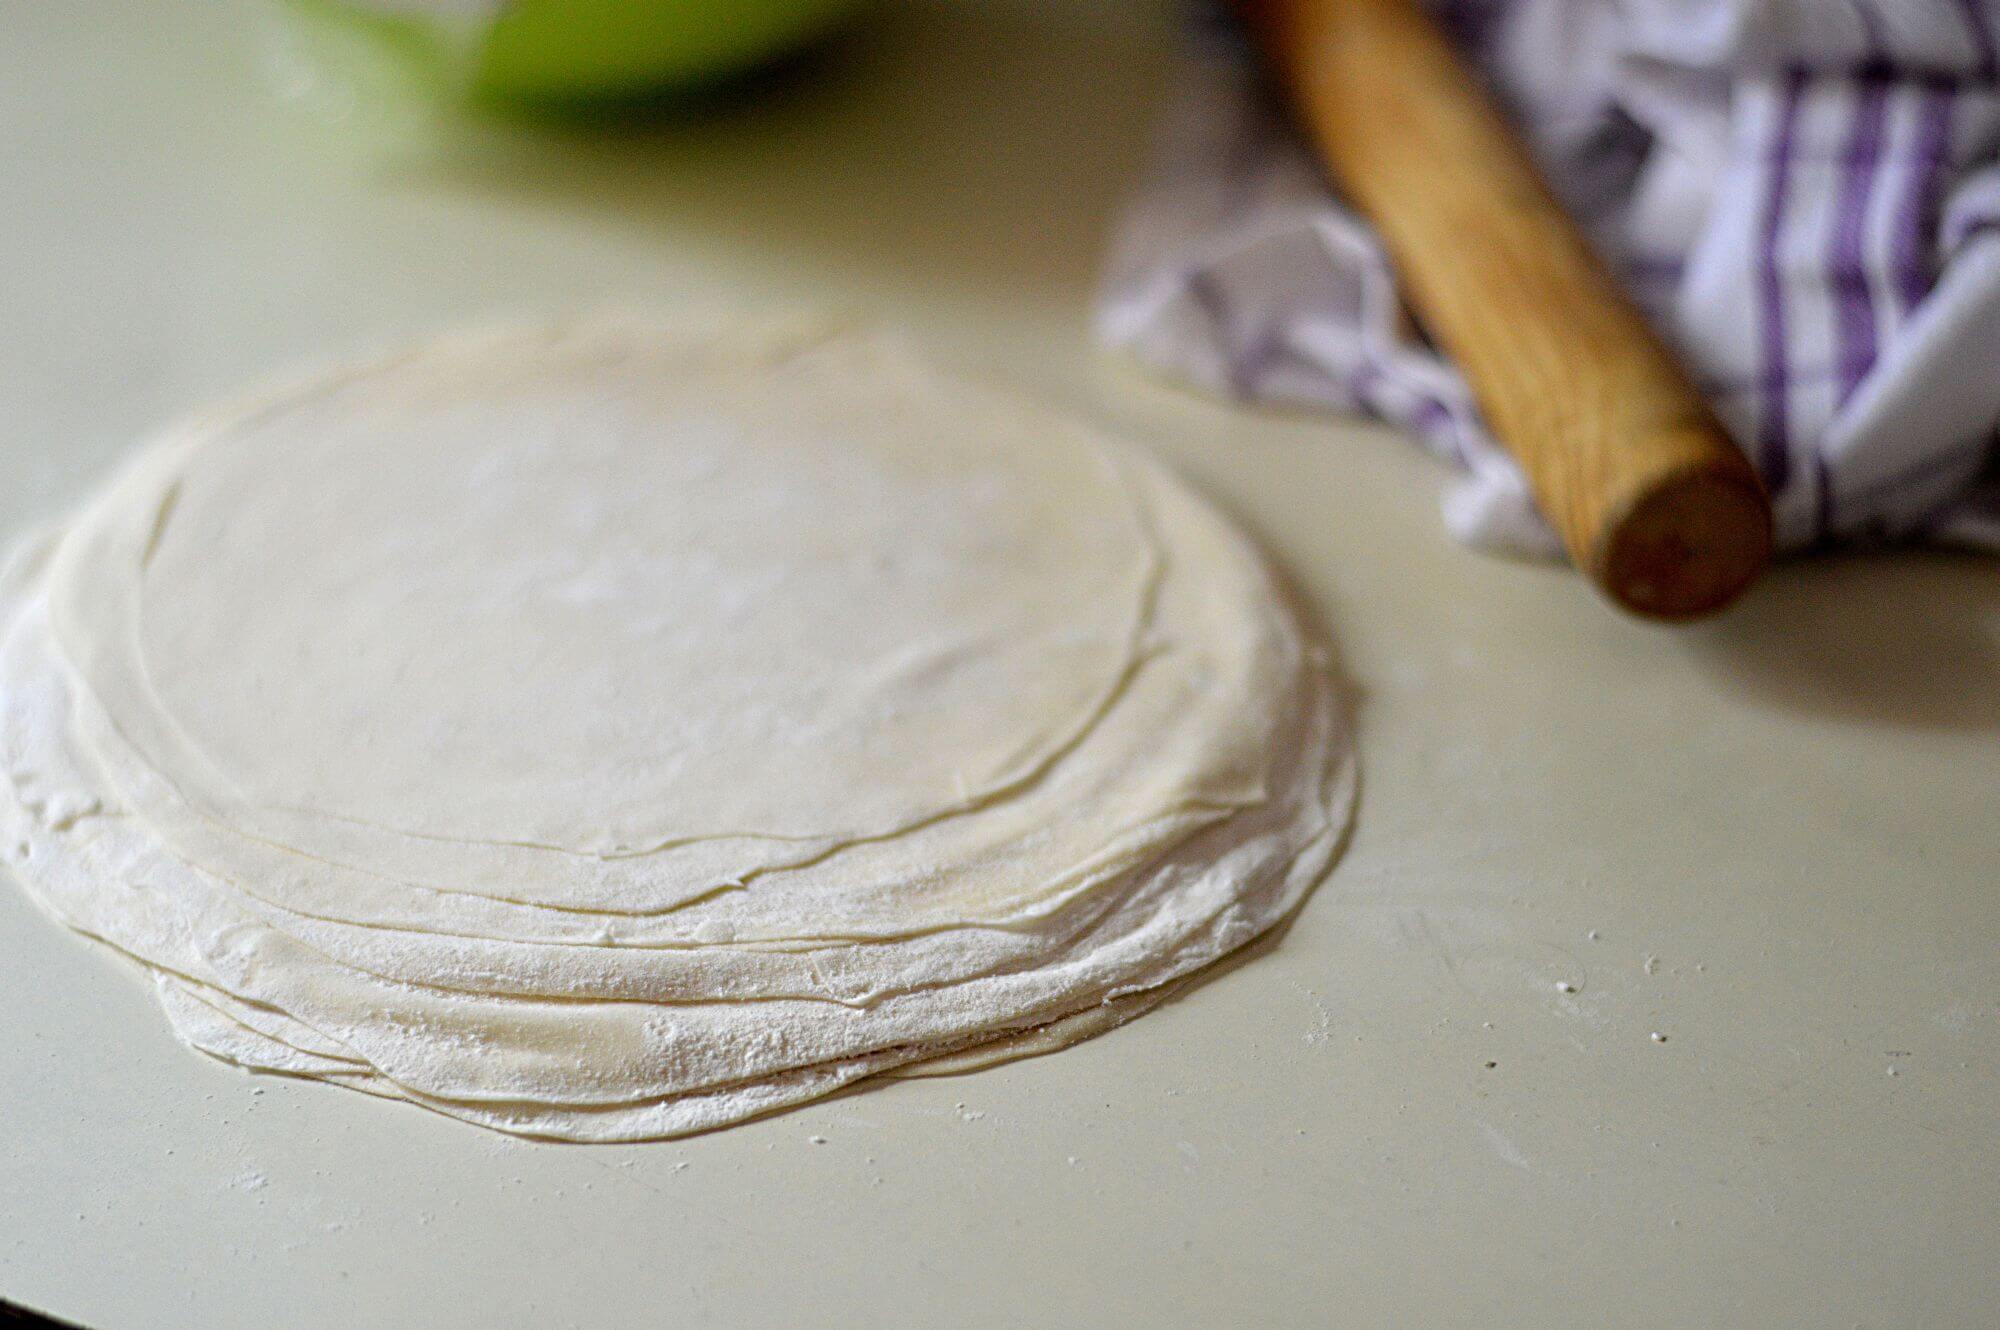 Now give the entire pile of rolled out sheets an additional gentle roll out with a rolling pin.